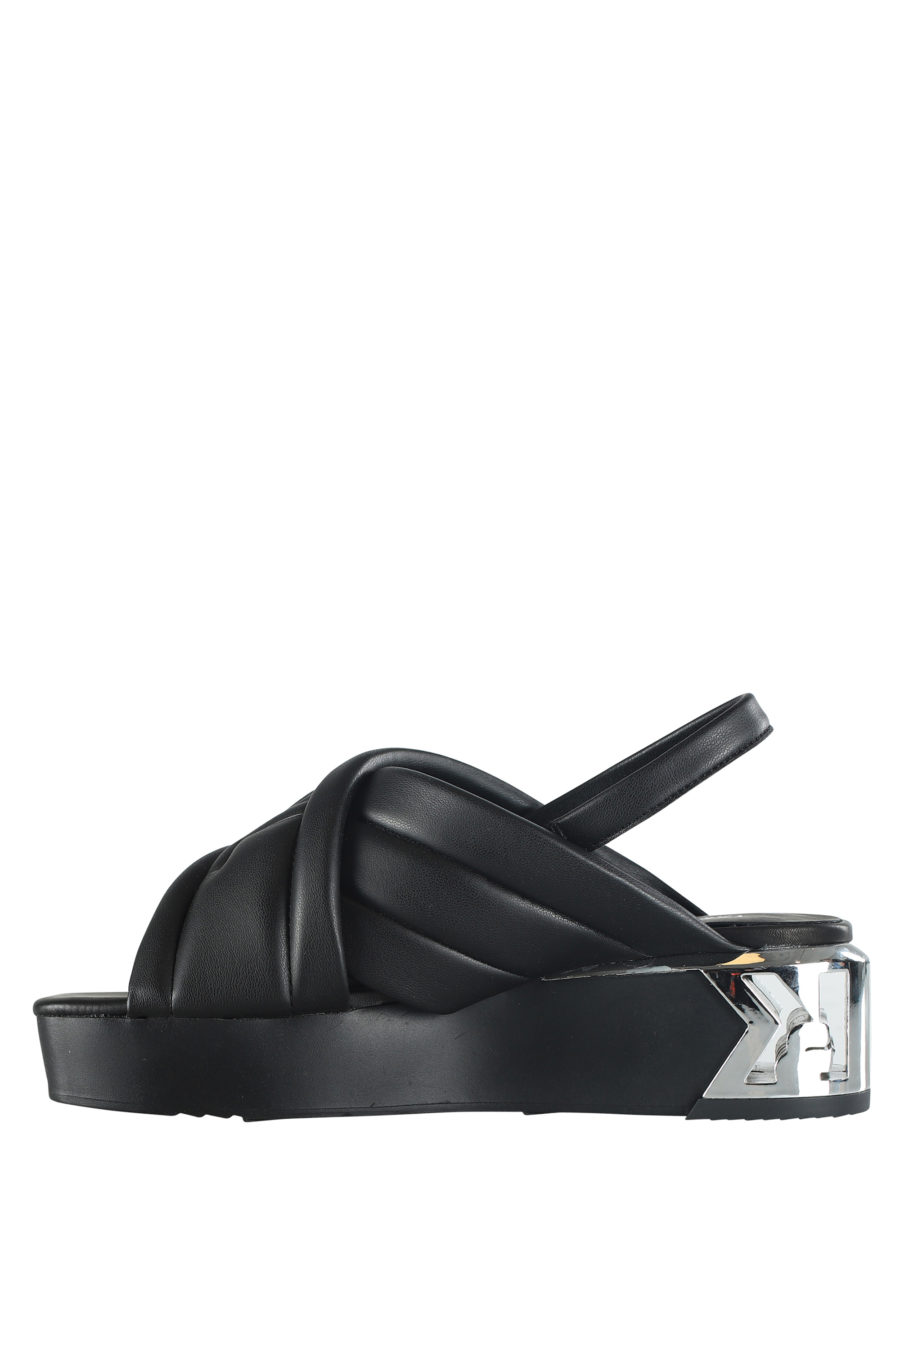 Black cushioned sandals with black logo and platform - IMG 5333